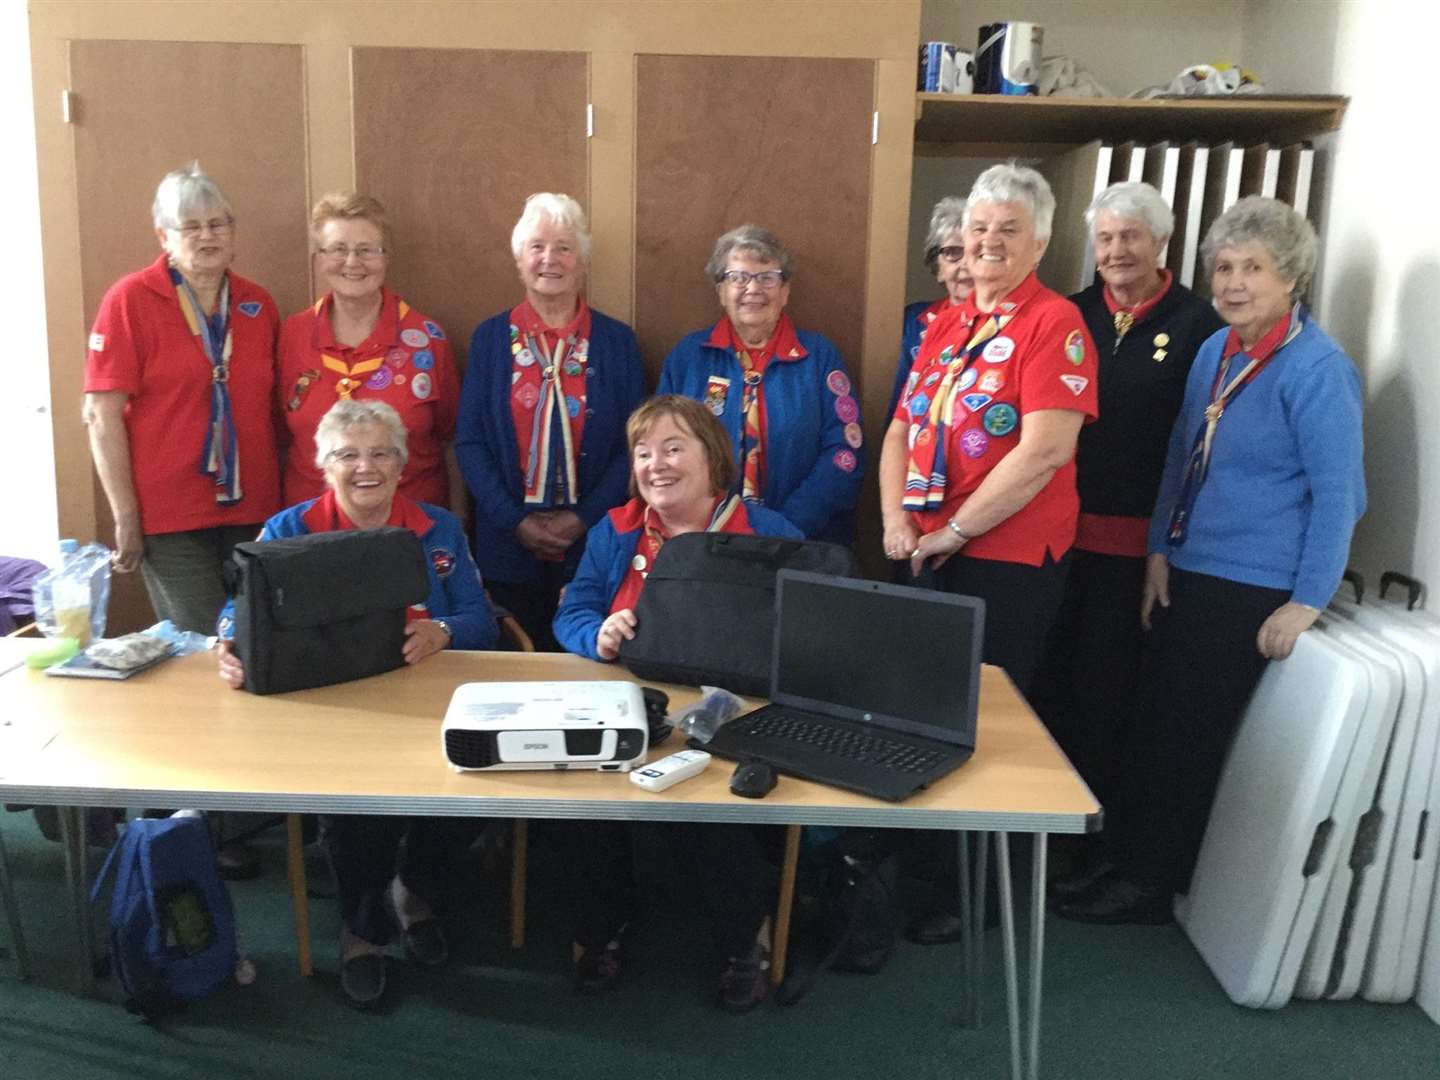 Ladies of the Trefoil Guild, who received a grant from the Edintore Wind Farm Benefit Fund to buy presentation equipment.